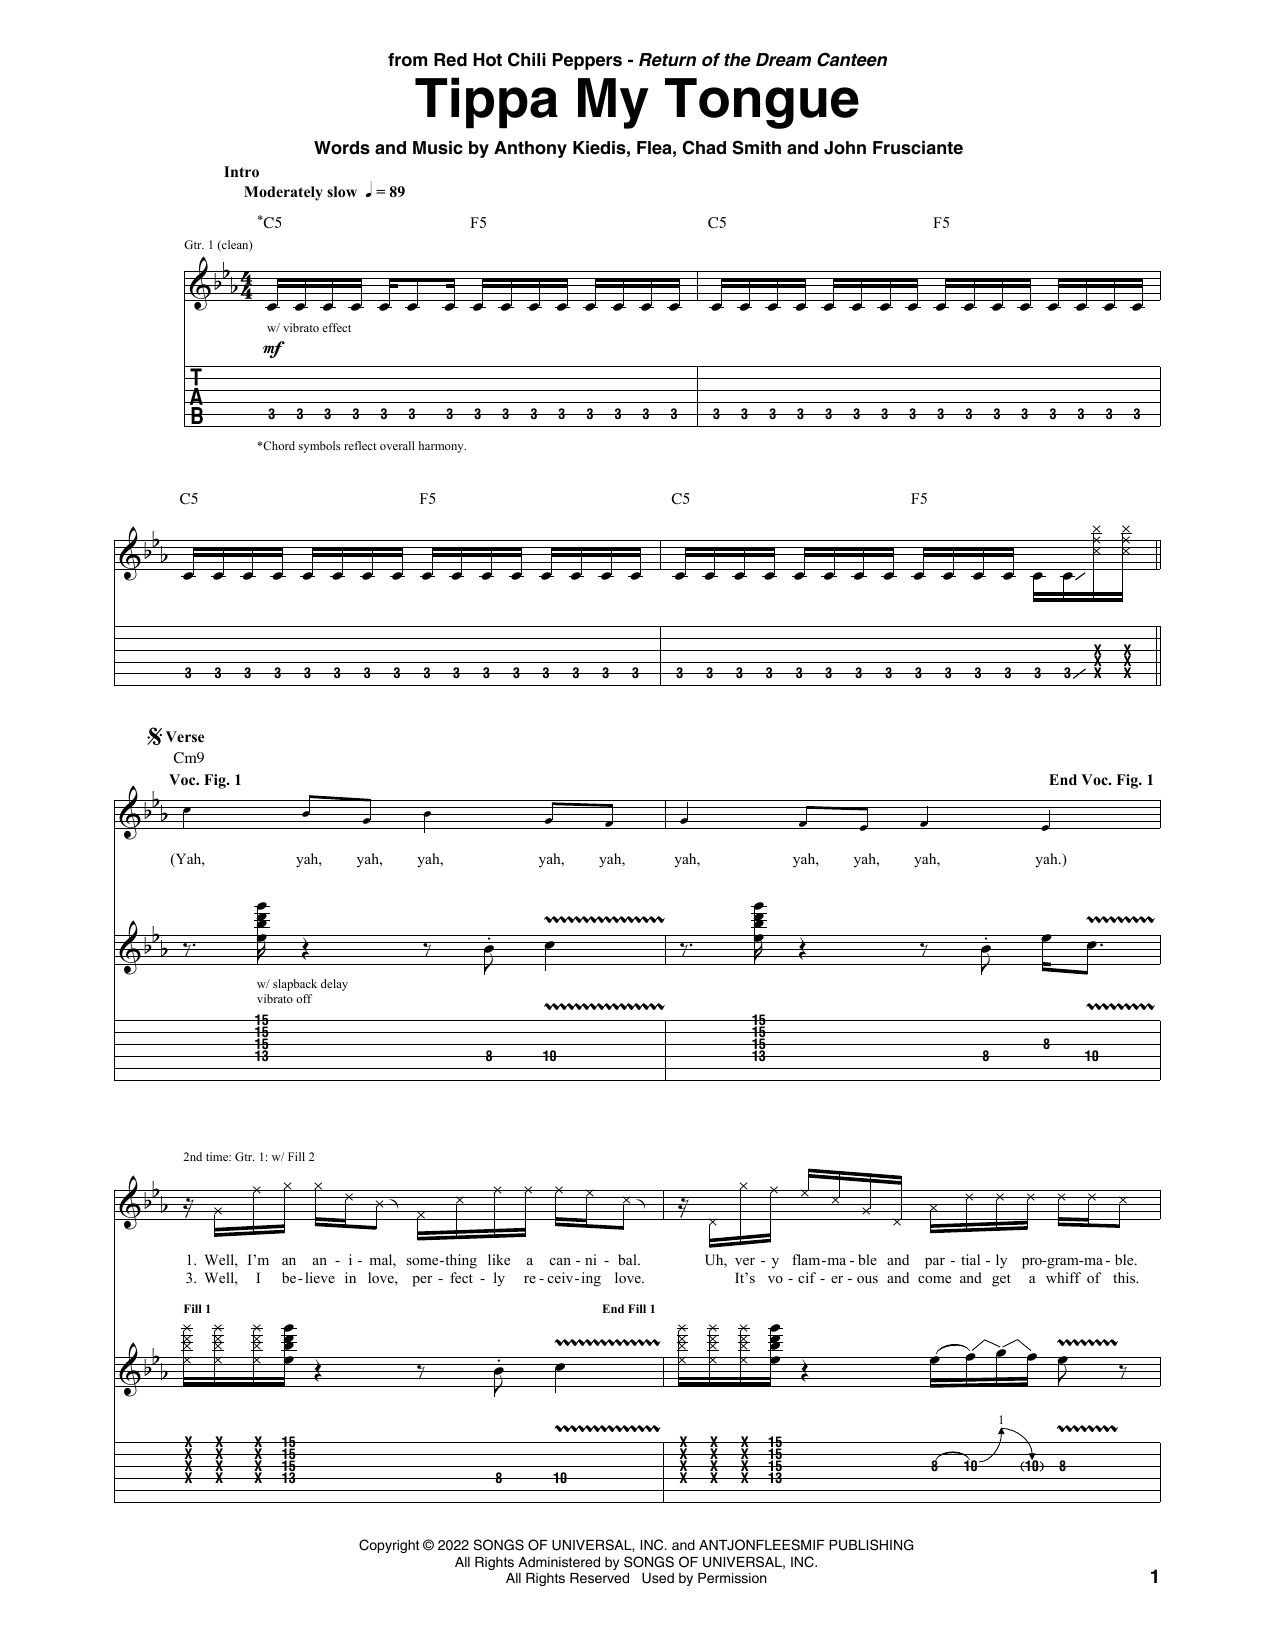 Download Red Hot Chili Peppers Tippa My Tongue Sheet Music